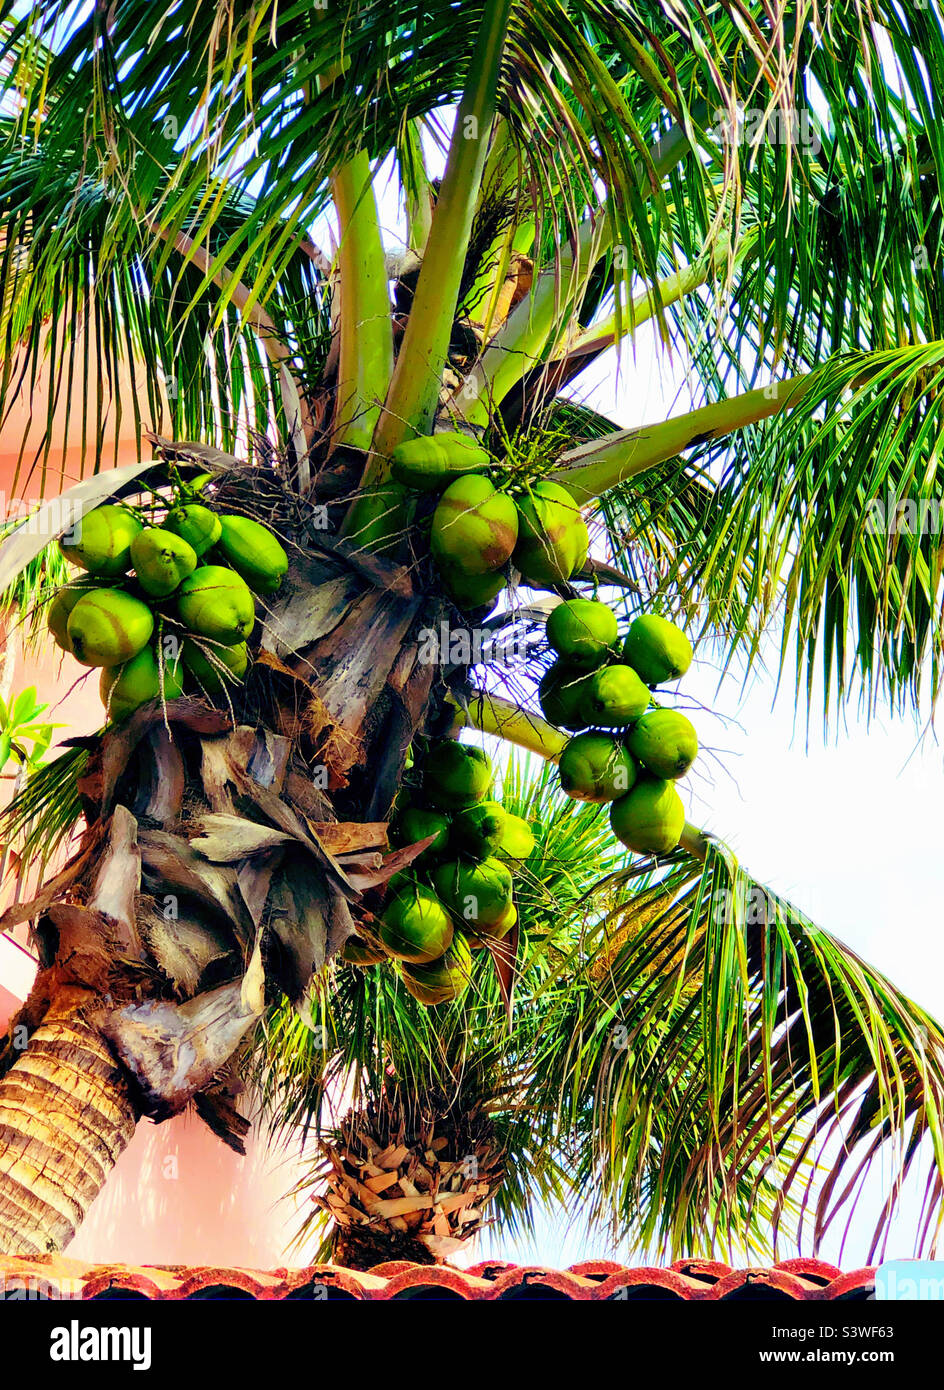 A coconut palm tree in Florida Stock Photo